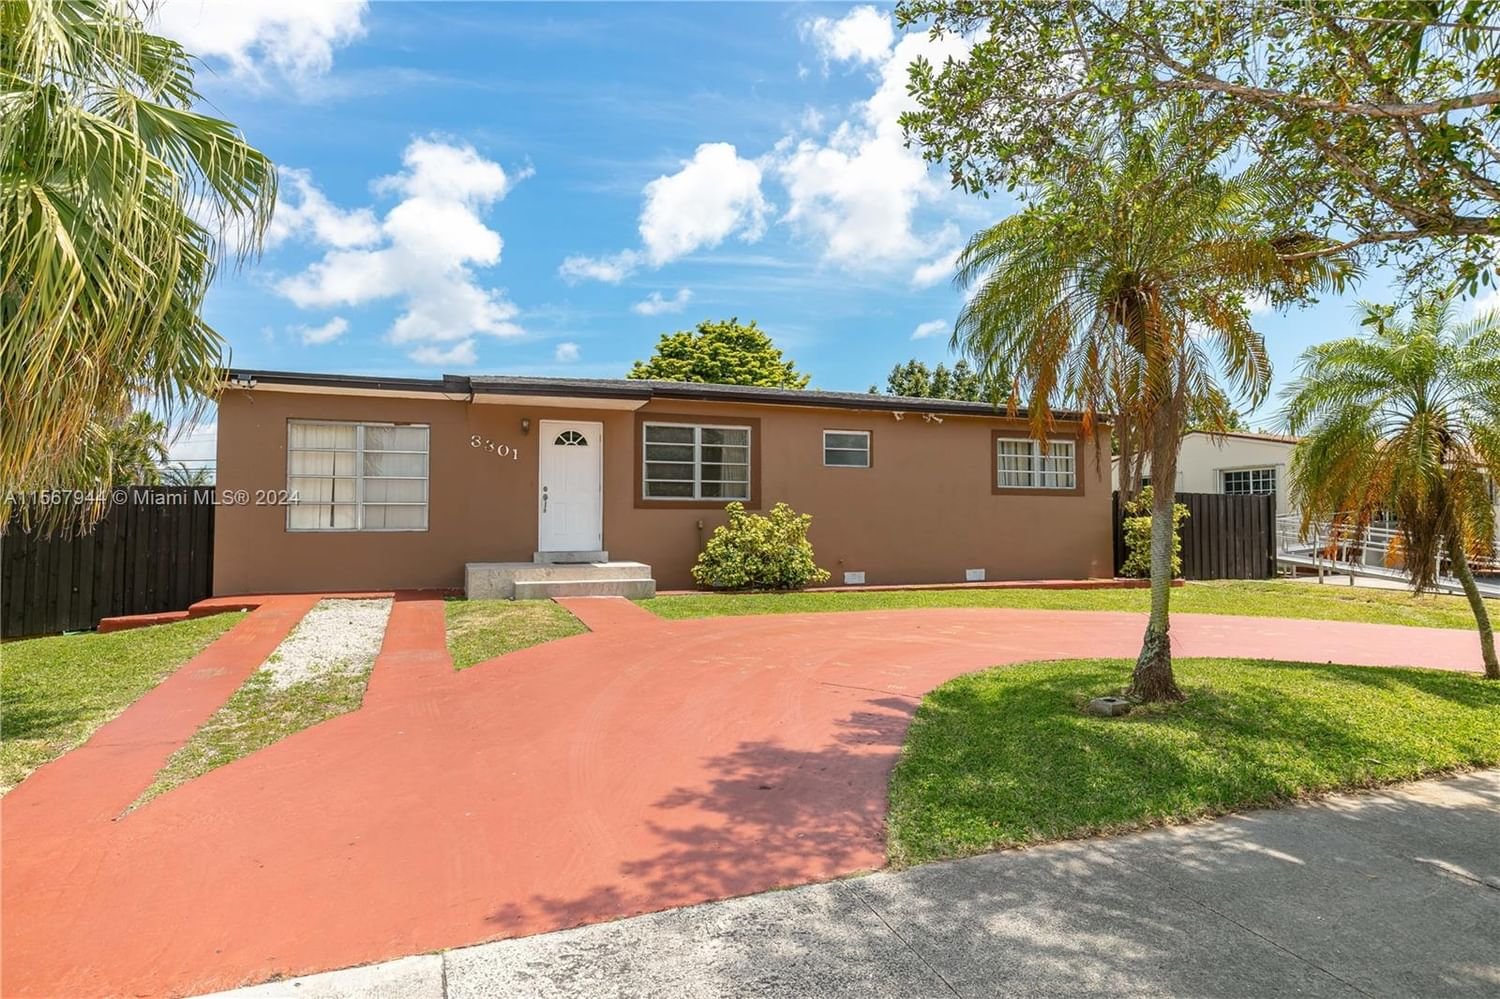 Real estate property located at 3301 82nd Ave, Miami-Dade County, REV PL OF 3RD ADDN TO BAK, Miami, FL